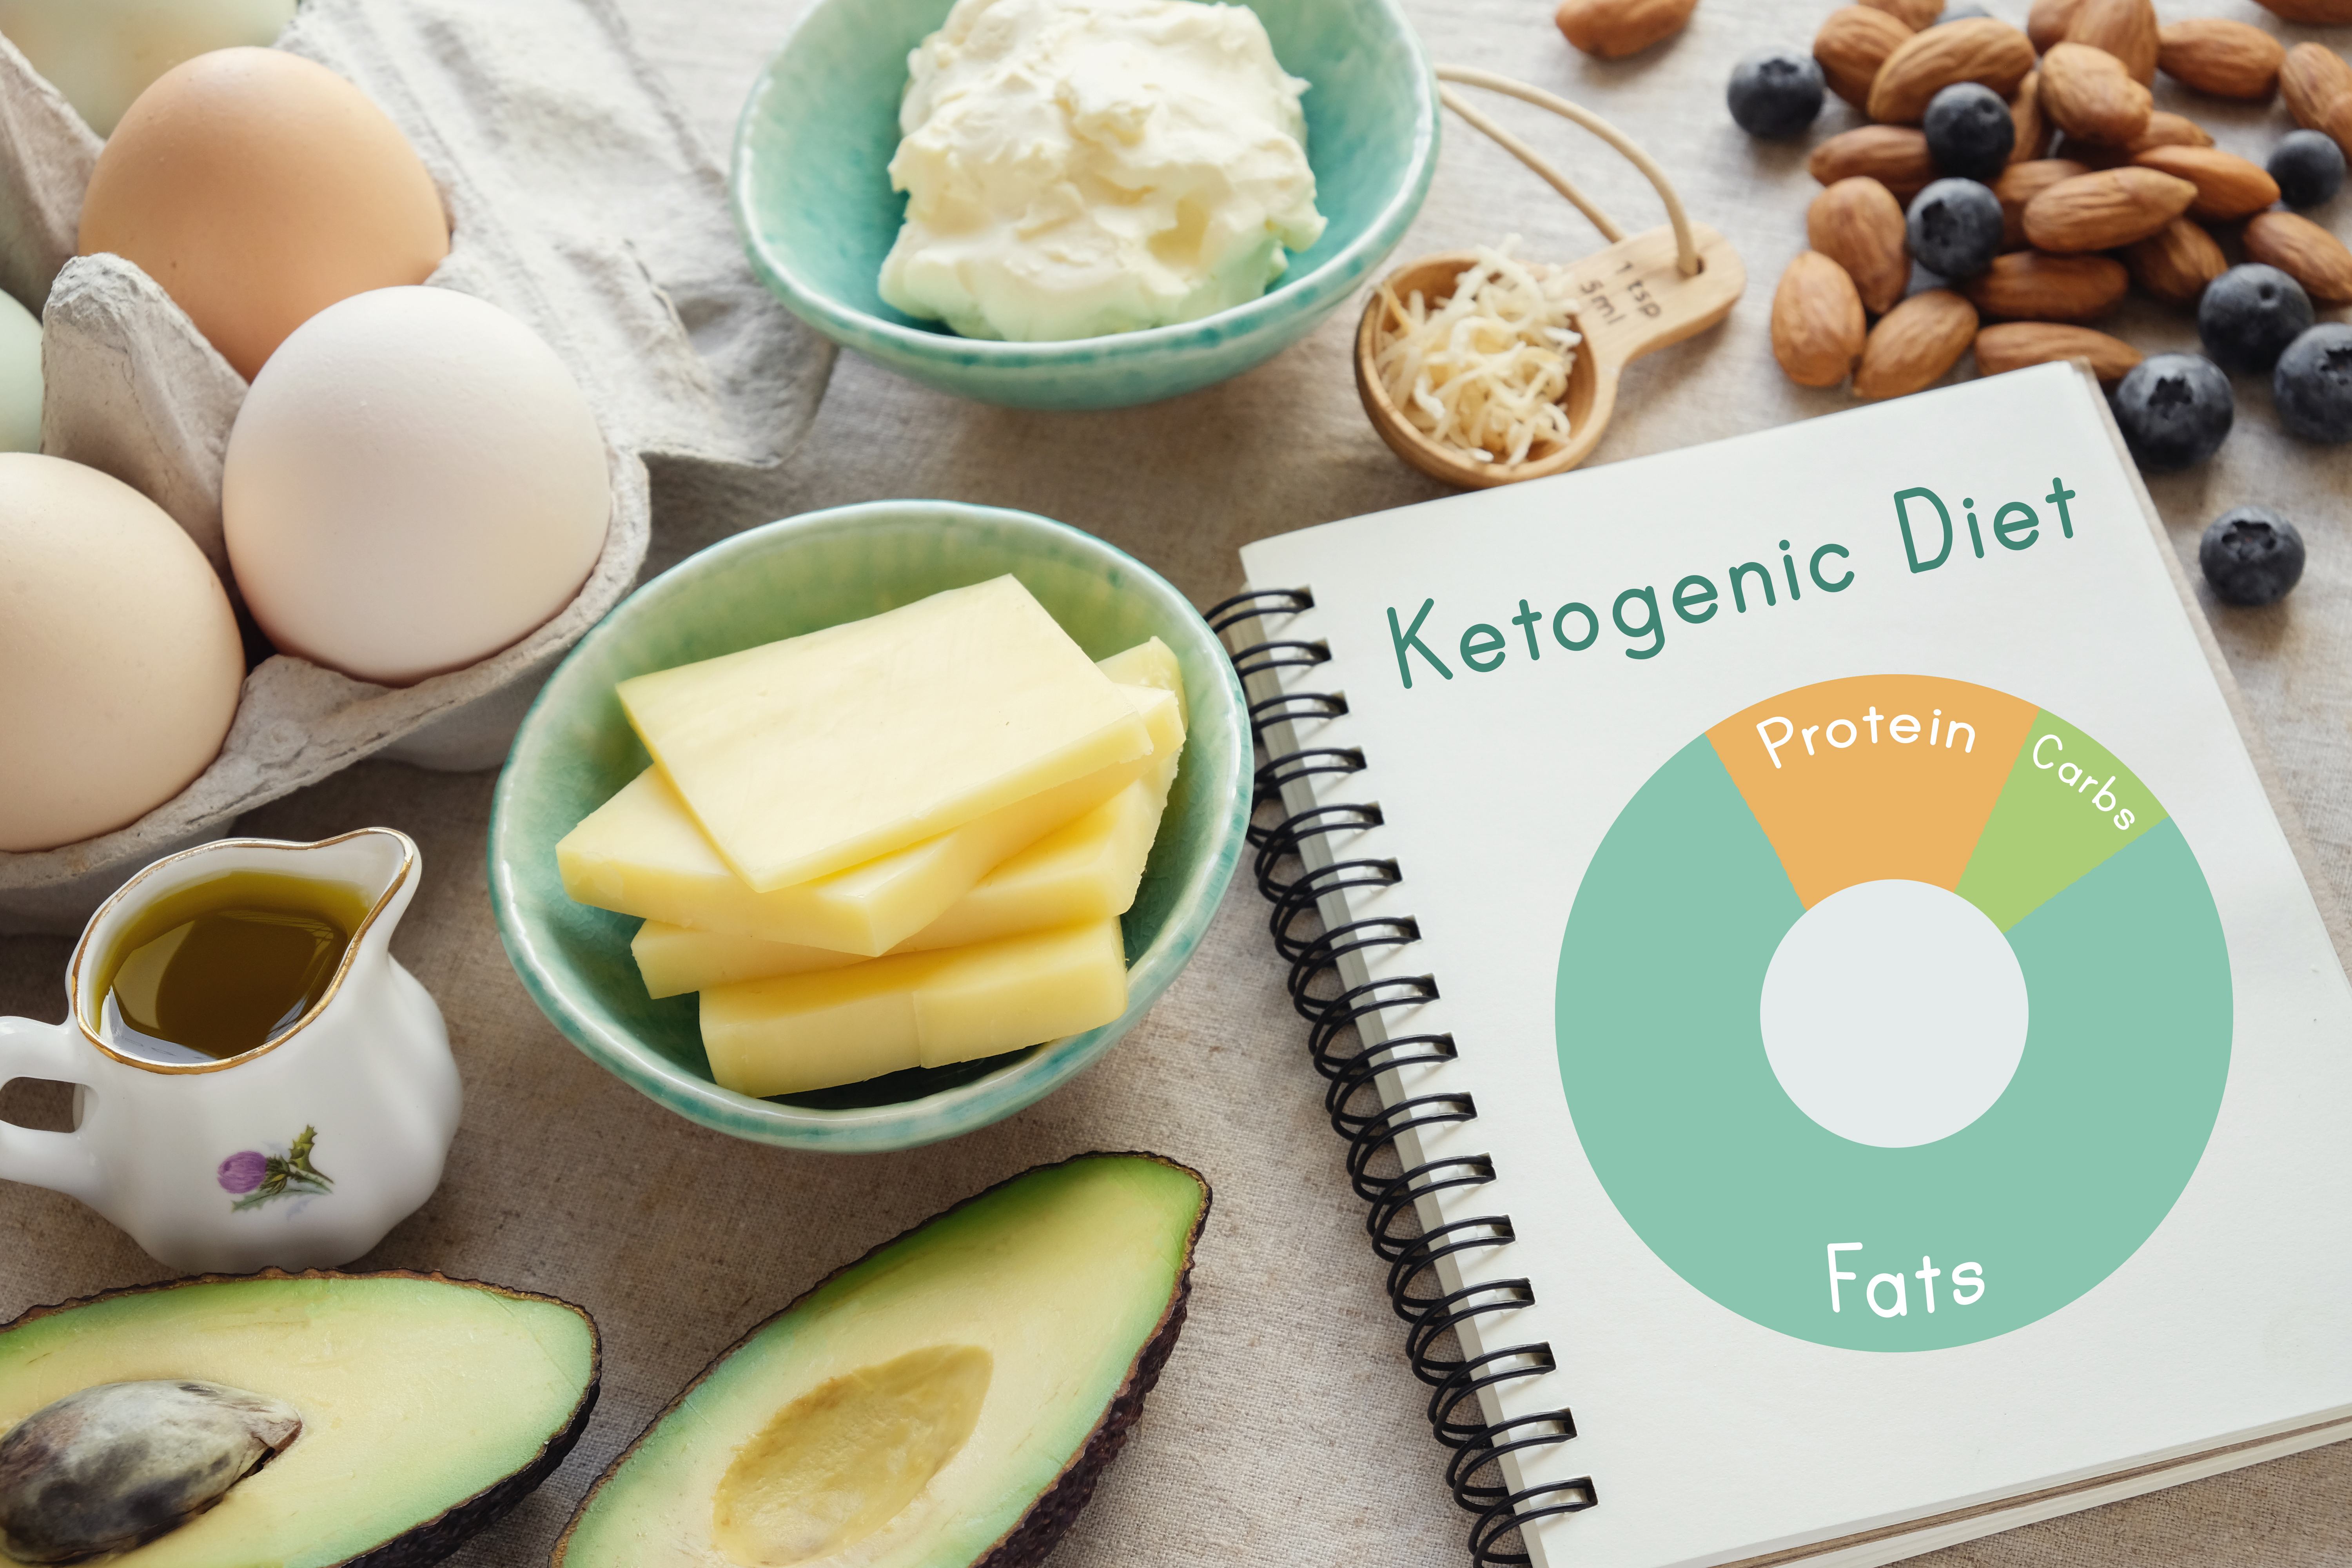 What is the Famous Ketogenic Diet?